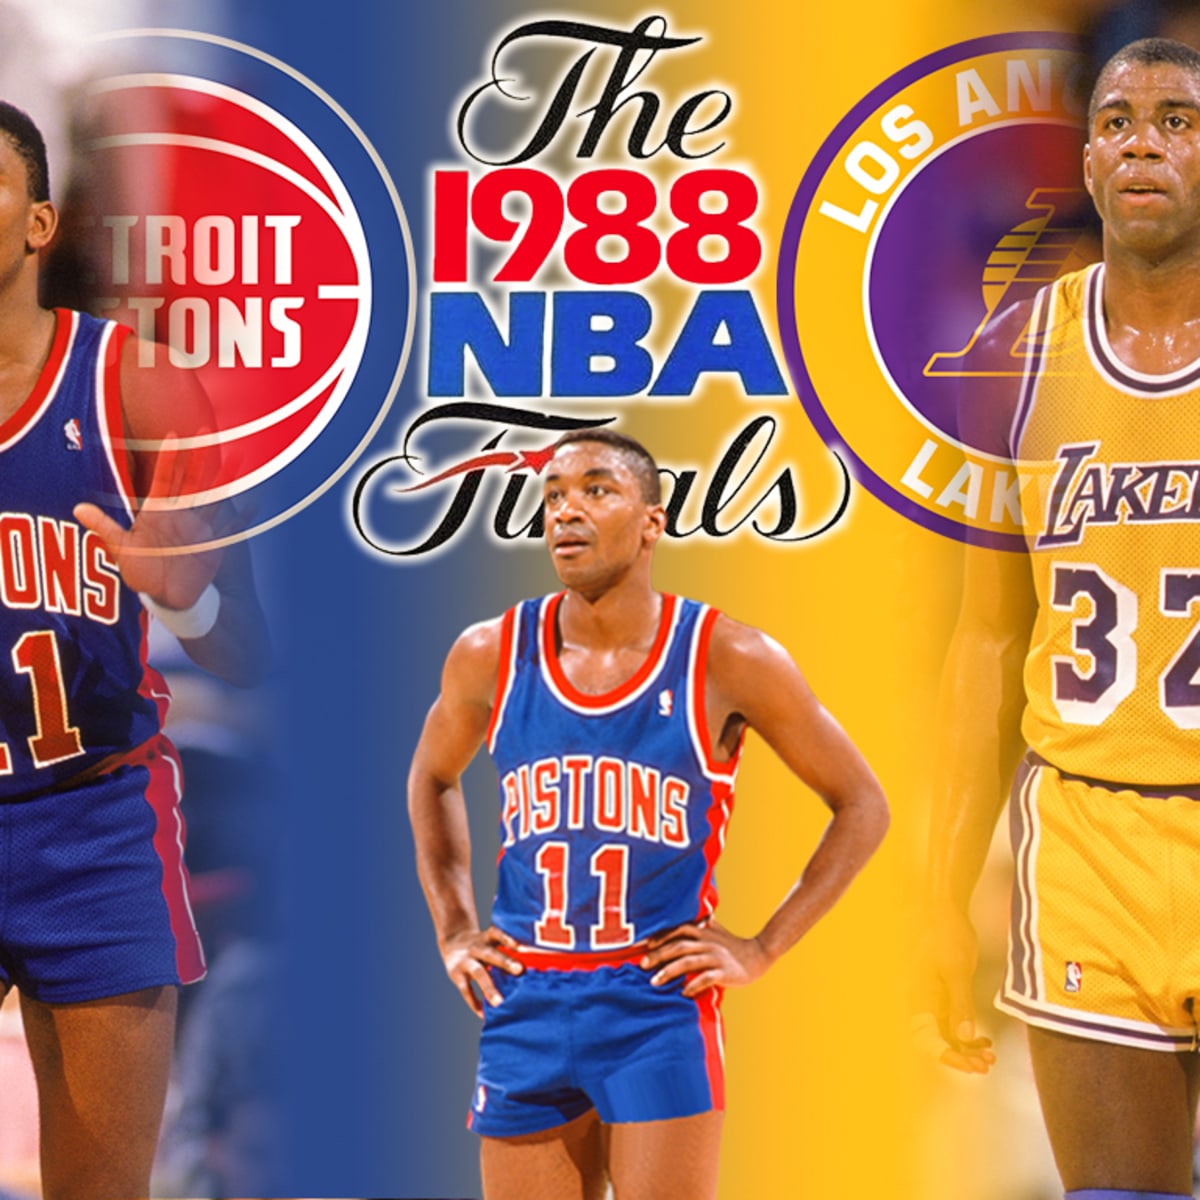 NBA - 1988 NBA Finals - Game 6: Isiah Thomas' heroic performance against  Lakers on injured ankle.